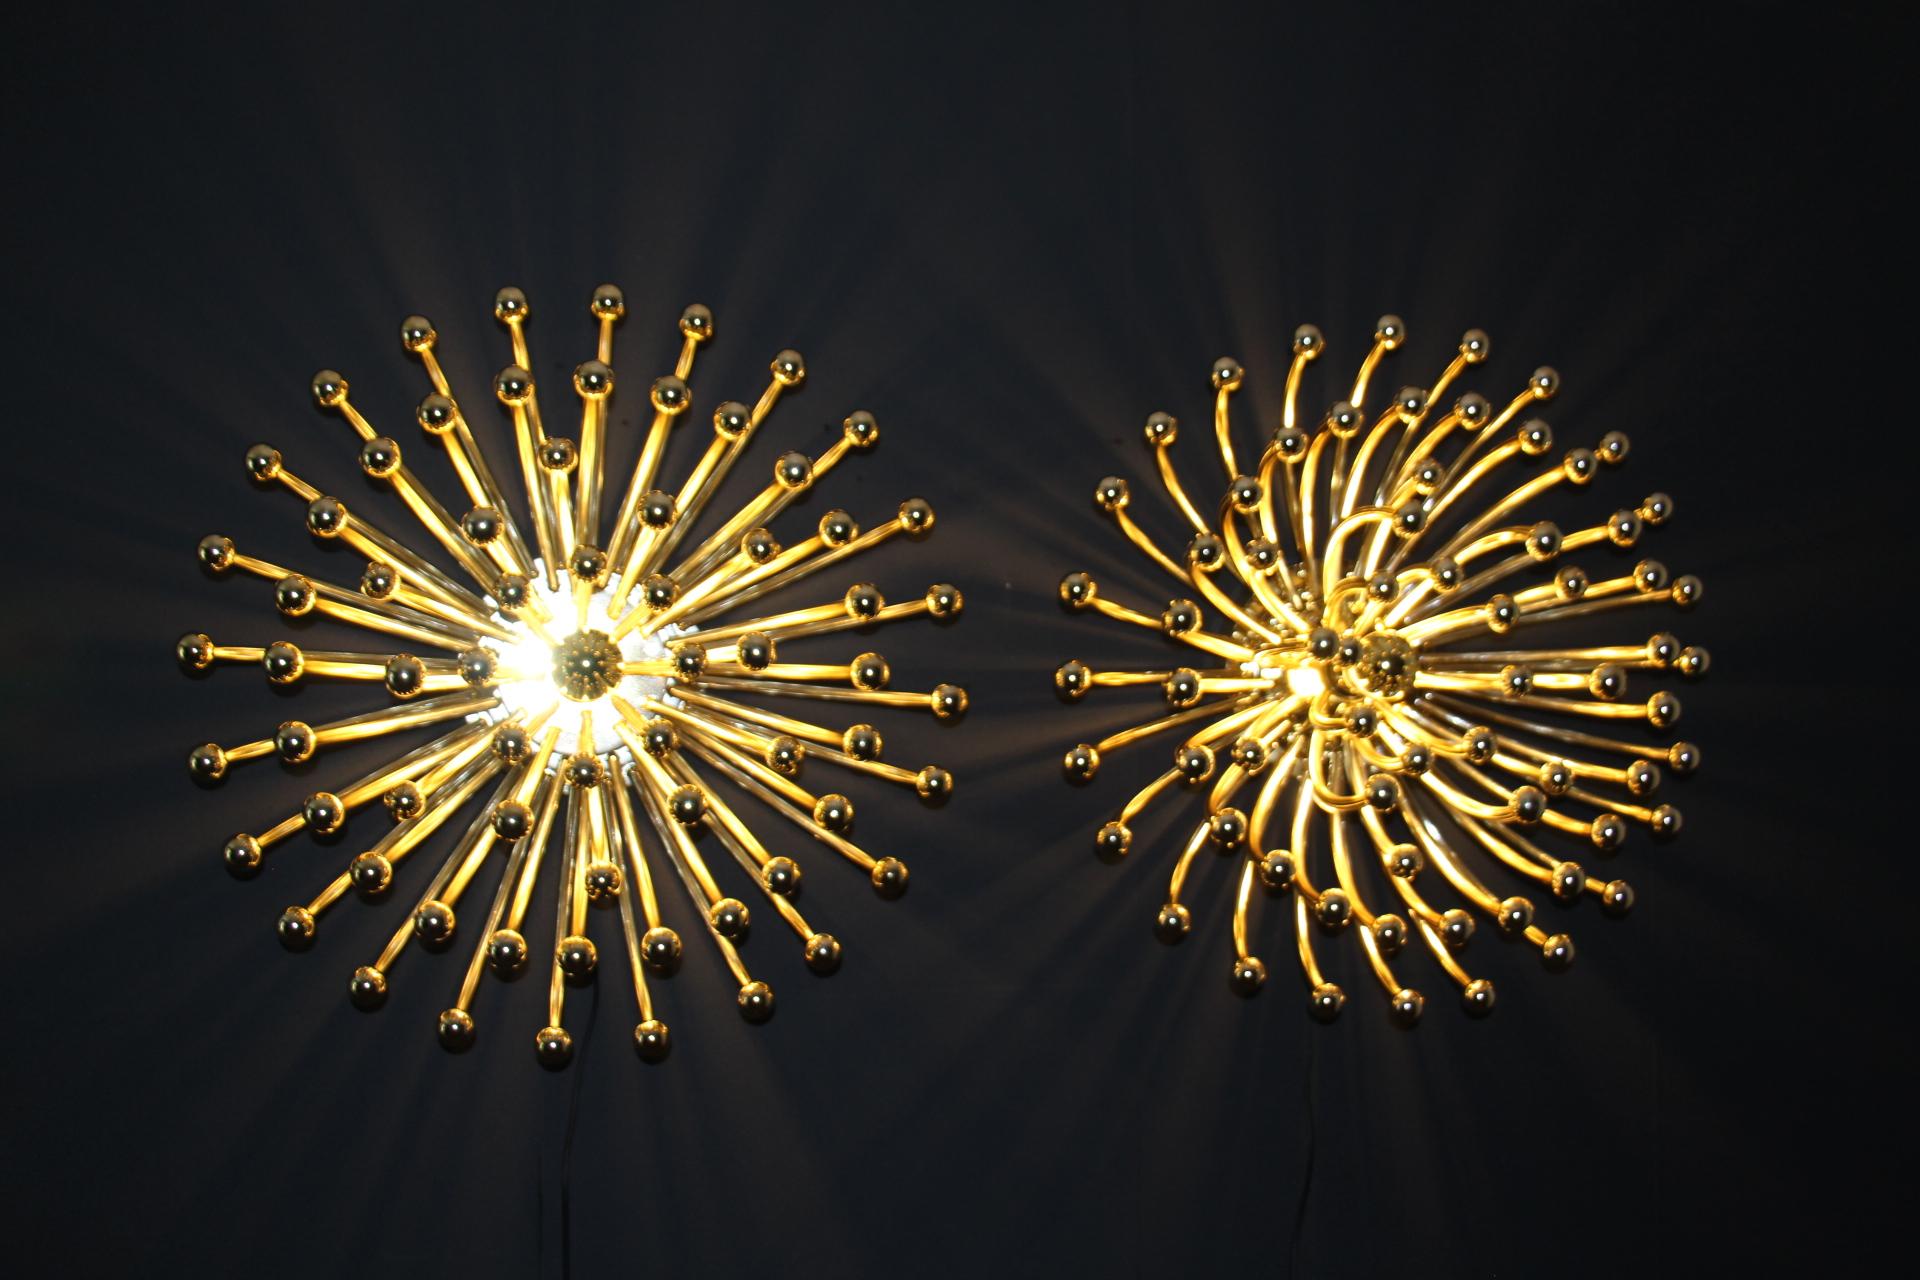  60 cm Gold Pistillo Chandeliers, table lamps or Wall Lamps By Valenti Milano For Sale 2